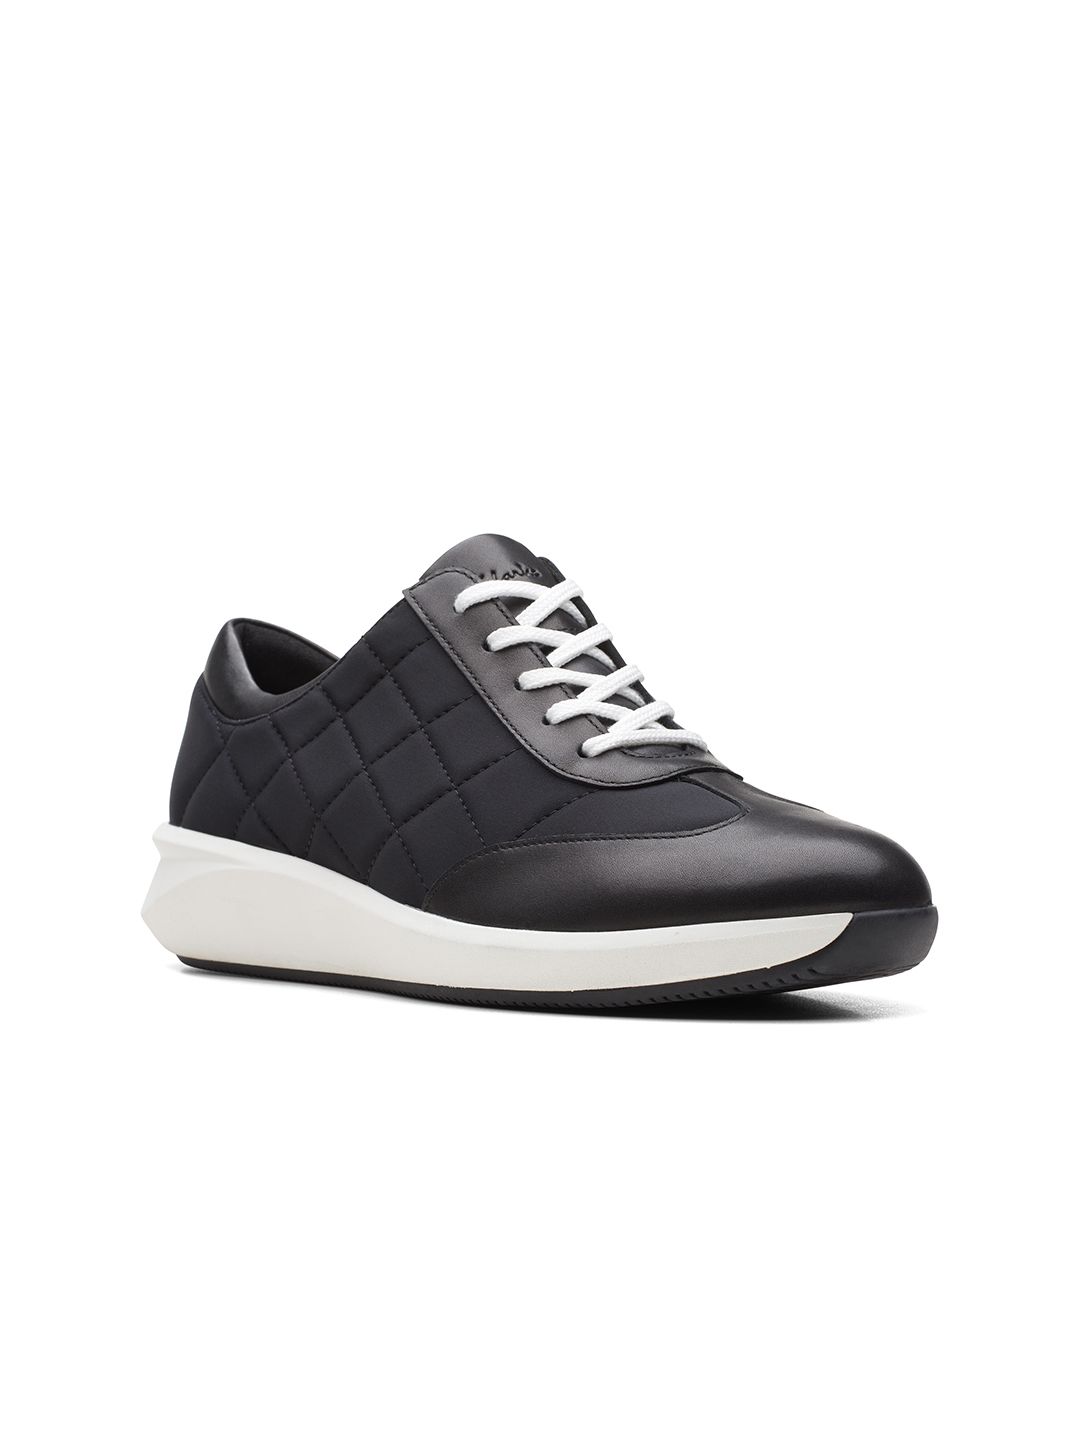 Clarks Women Black Woven Design Leather Sneakers Price in India